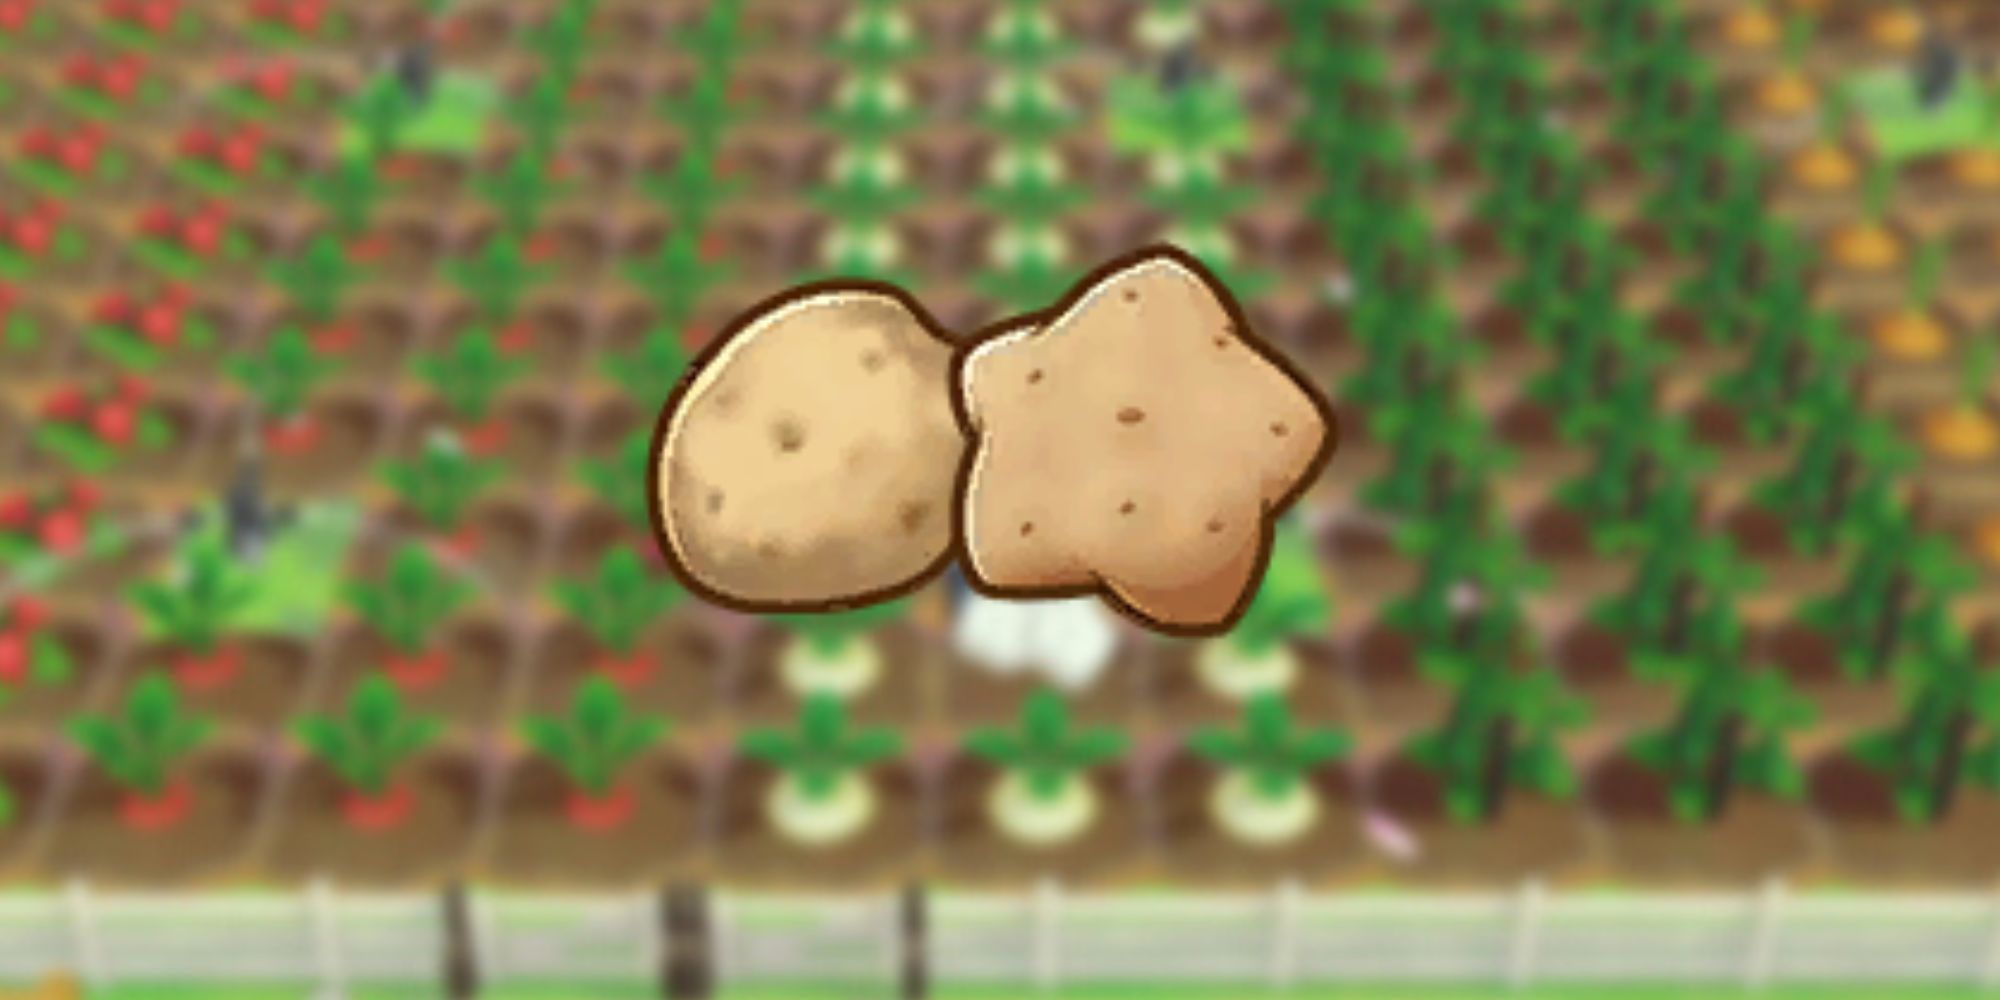 Potato and Star Potato icon as it would be seen in players inventory over blurred background of crops in game